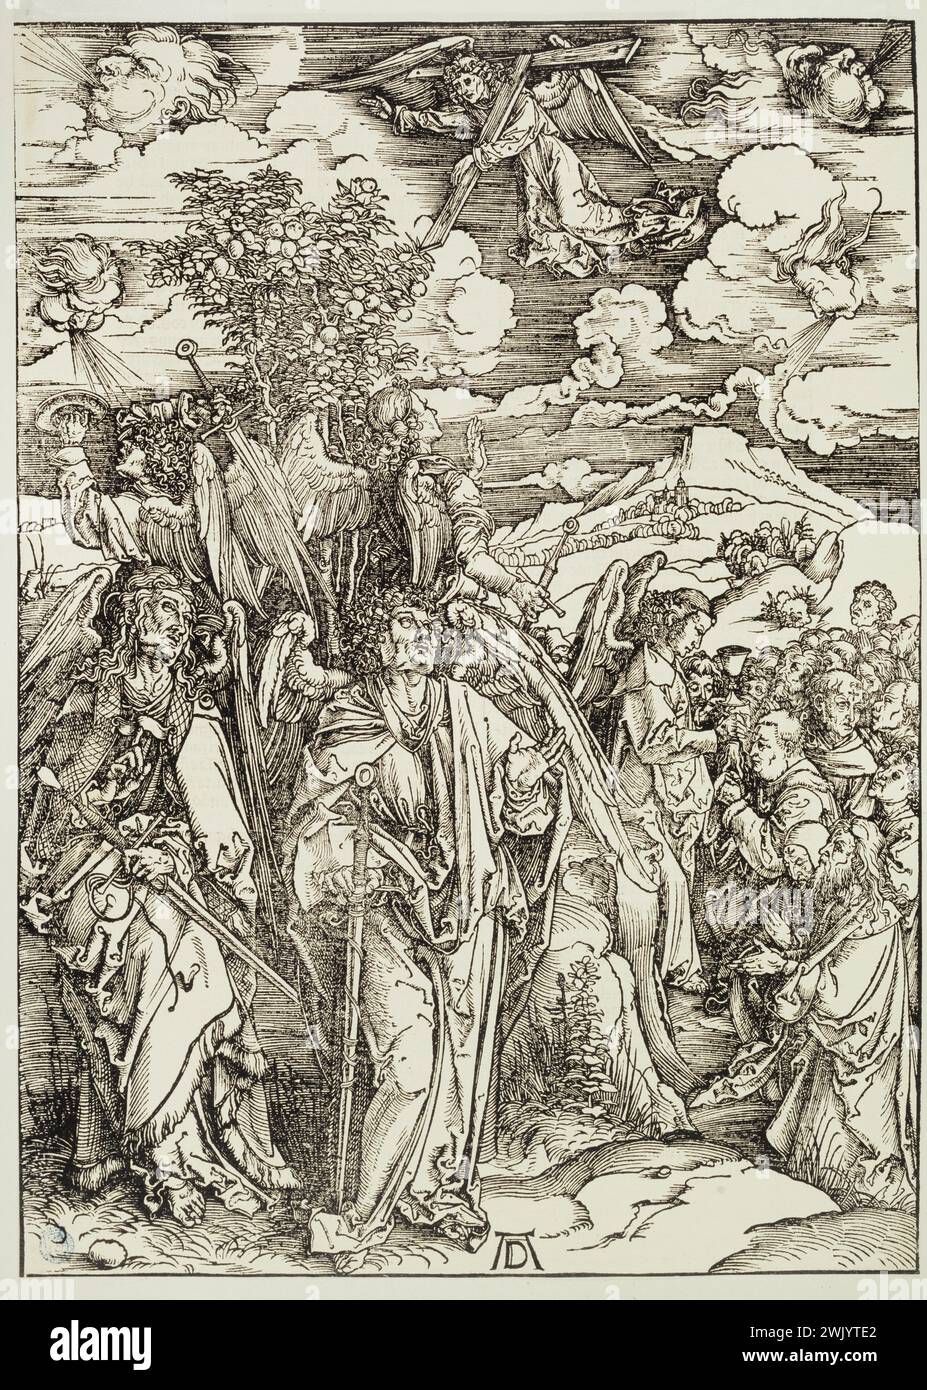 Albrecht Dürer (1471-1528). The apocalypse (Latin edition): the four angels holding the four winds of the earth (Bartsch 66). 1497. Museum of Fine Arts of the City of Paris, Petit Palais. 77217-8 Angel, Apocalypse, Catholic art, Chretian art, religious art, Christianity, Epee, Gospel according to Saint John, Ailee figure, sword, Holy History, Human, Humanite, Chretian iconography, Religious Iconography, New Testament, Aile character, Biblical character, Prophety , Biblical story, Christian religion, revelation, Renaissance, blow, wind, vision, engraving Stock Photo